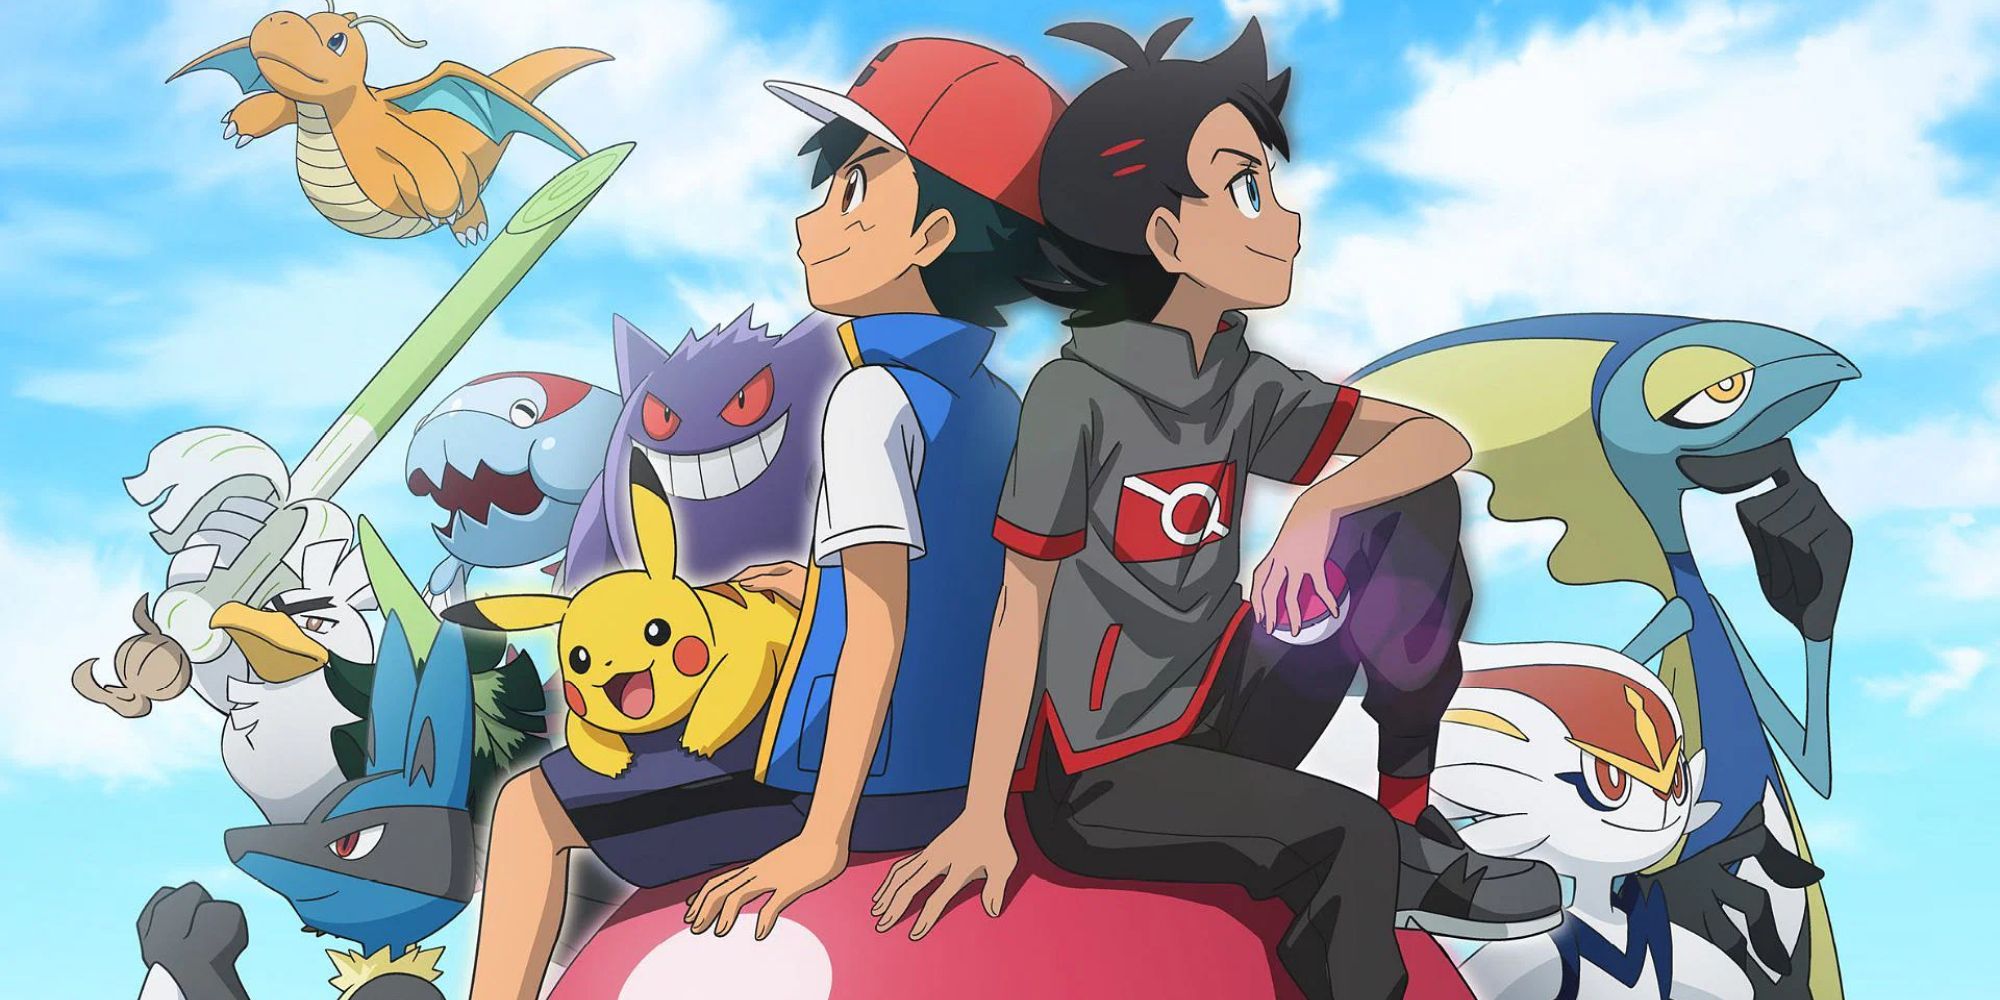 Ash and Goh sat on a large Pokeball surrounded by Pokemon